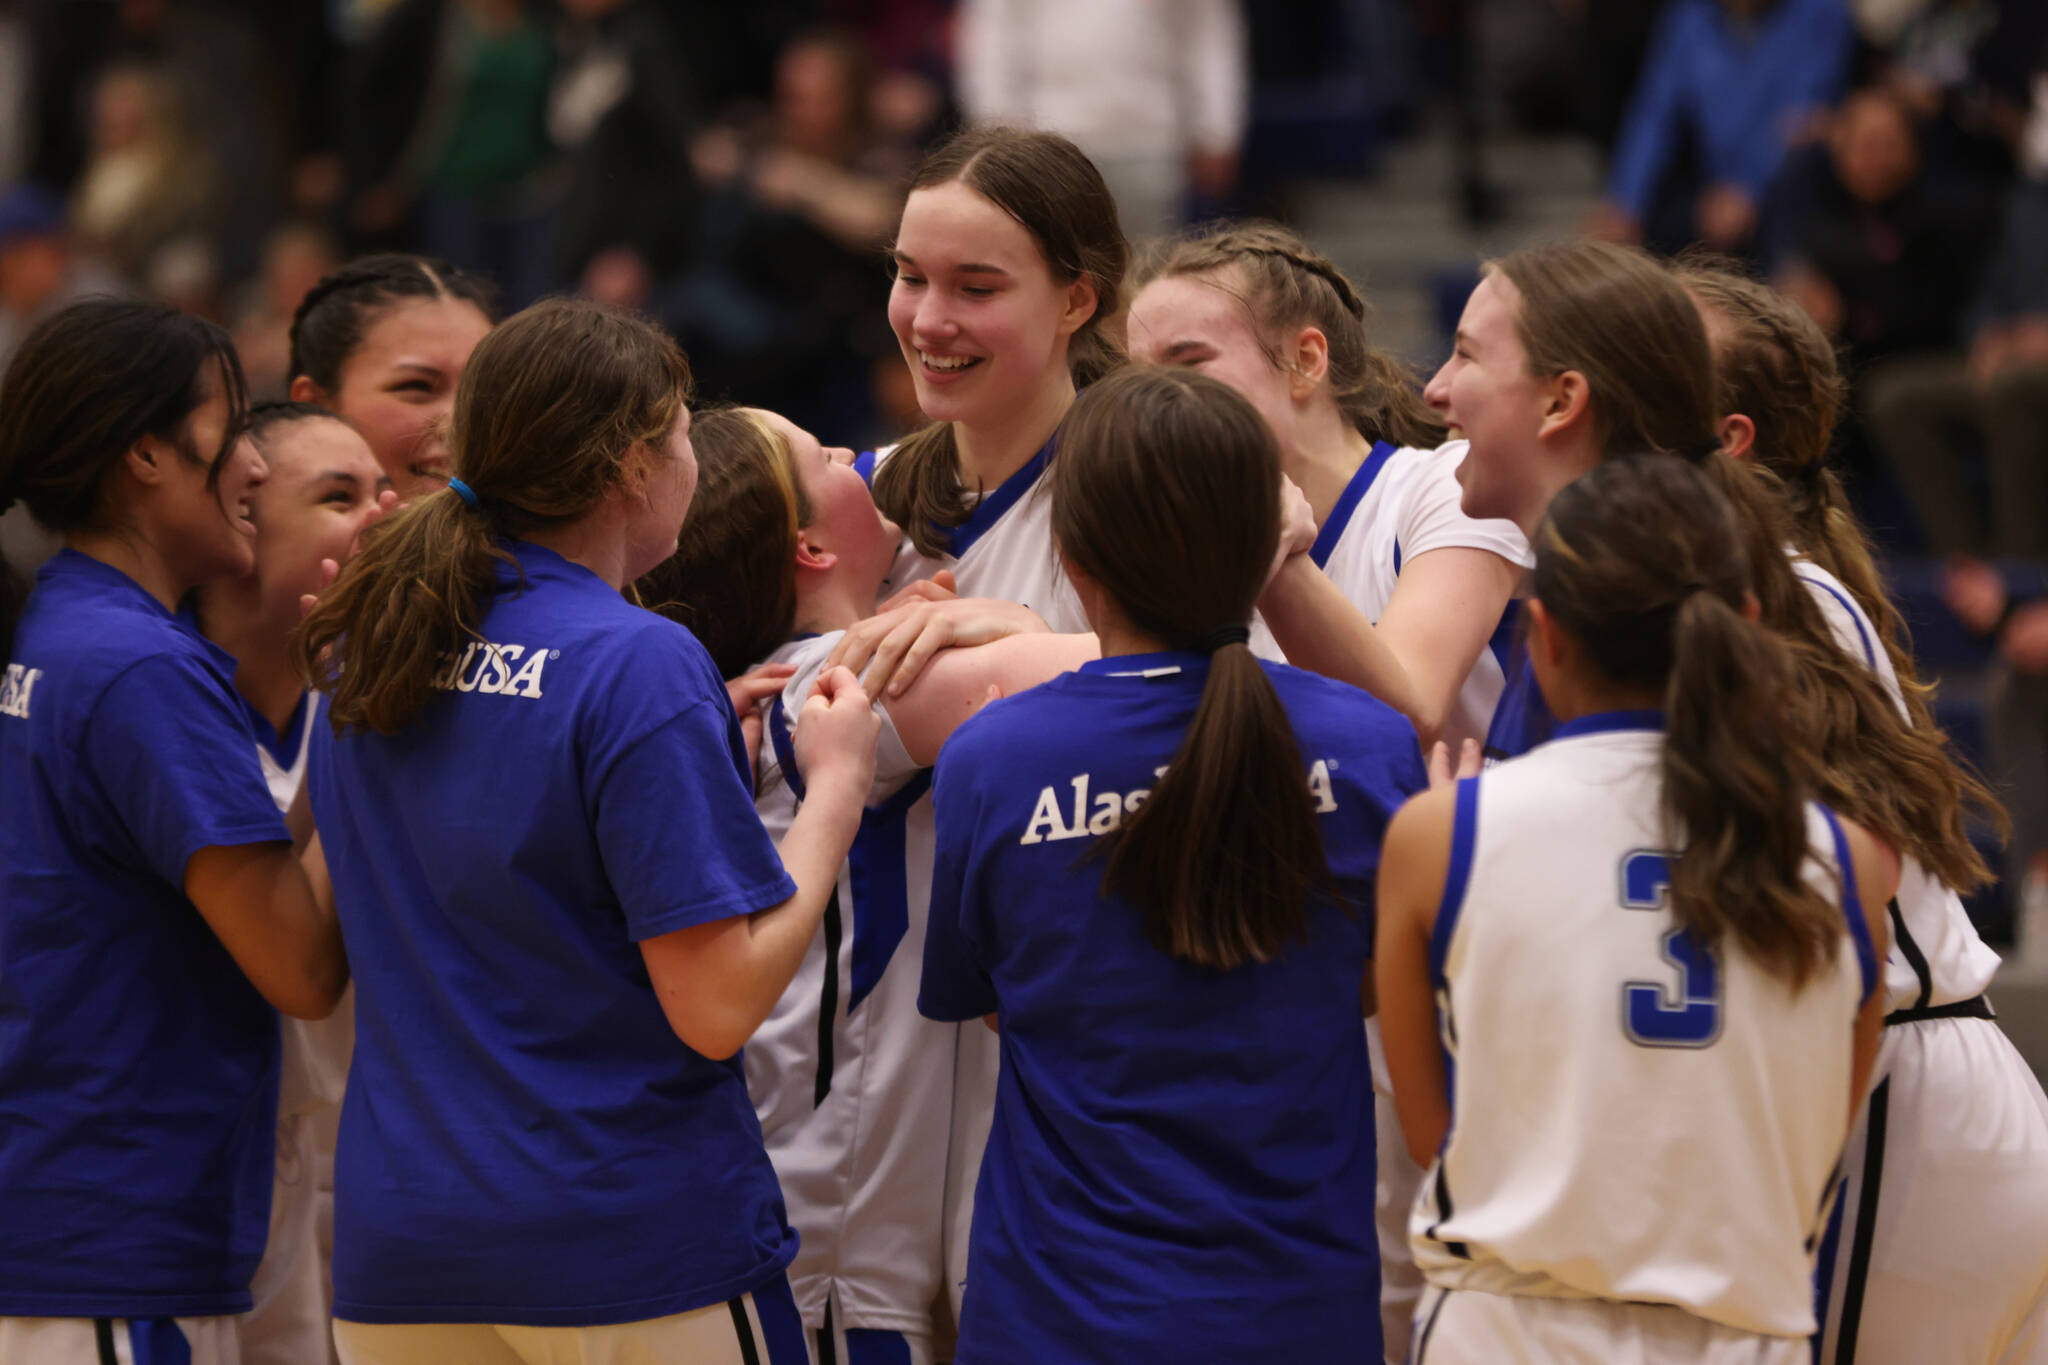 TMHS sophomore Cailynn Baxter (center) is swarmed by teammates following a last-second, game-winning shot against JDHS Tuesday night. The teams have met two times so far this season and each game has come down to the wire. (Ben Hohenstatt / Juneau Empire)